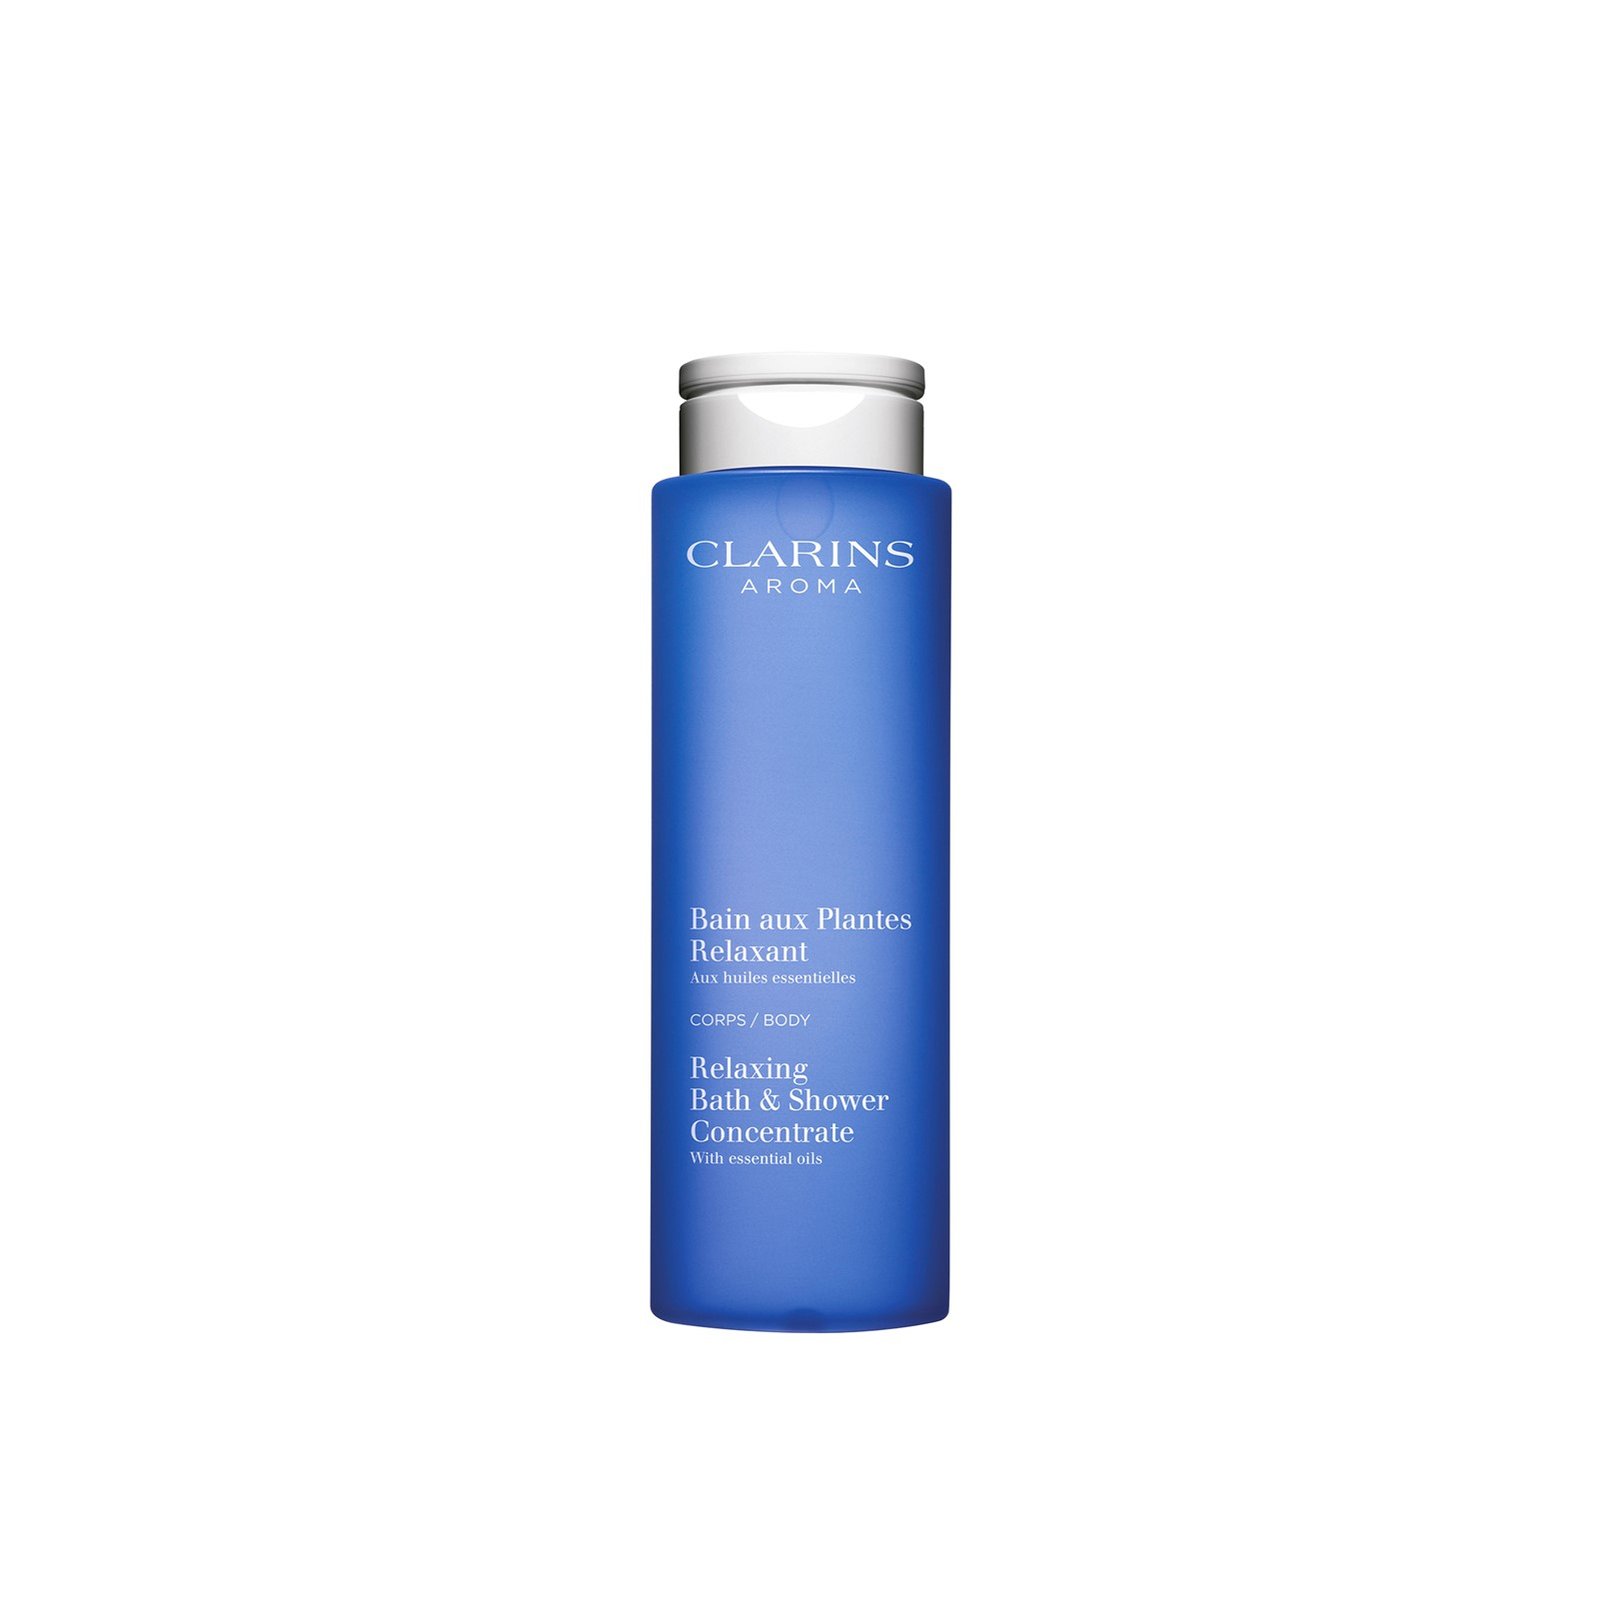 Clarins Aroma Relaxing Bath & Shower Concentrate 200ml